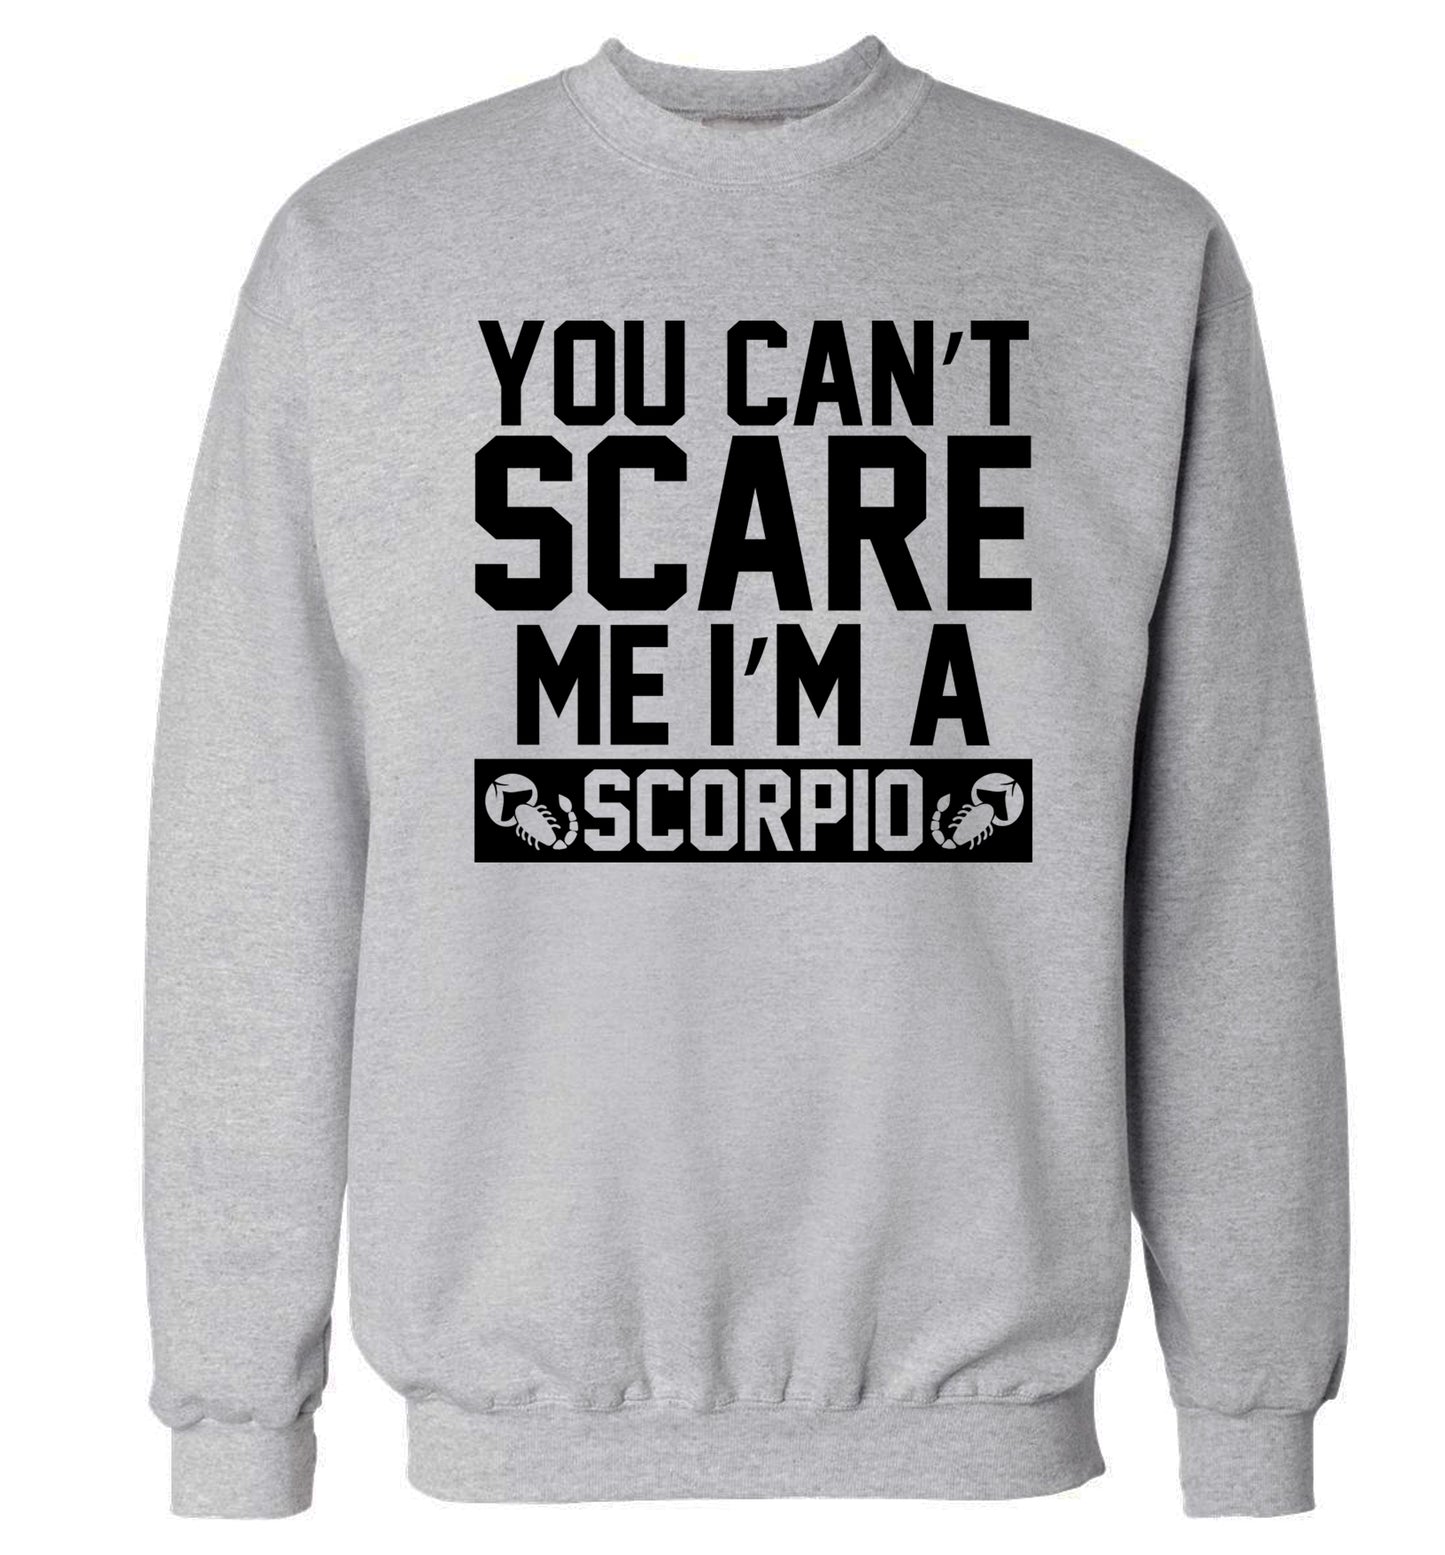 You can't scare me I'm a scorpio Adult's unisex grey Sweater 2XL